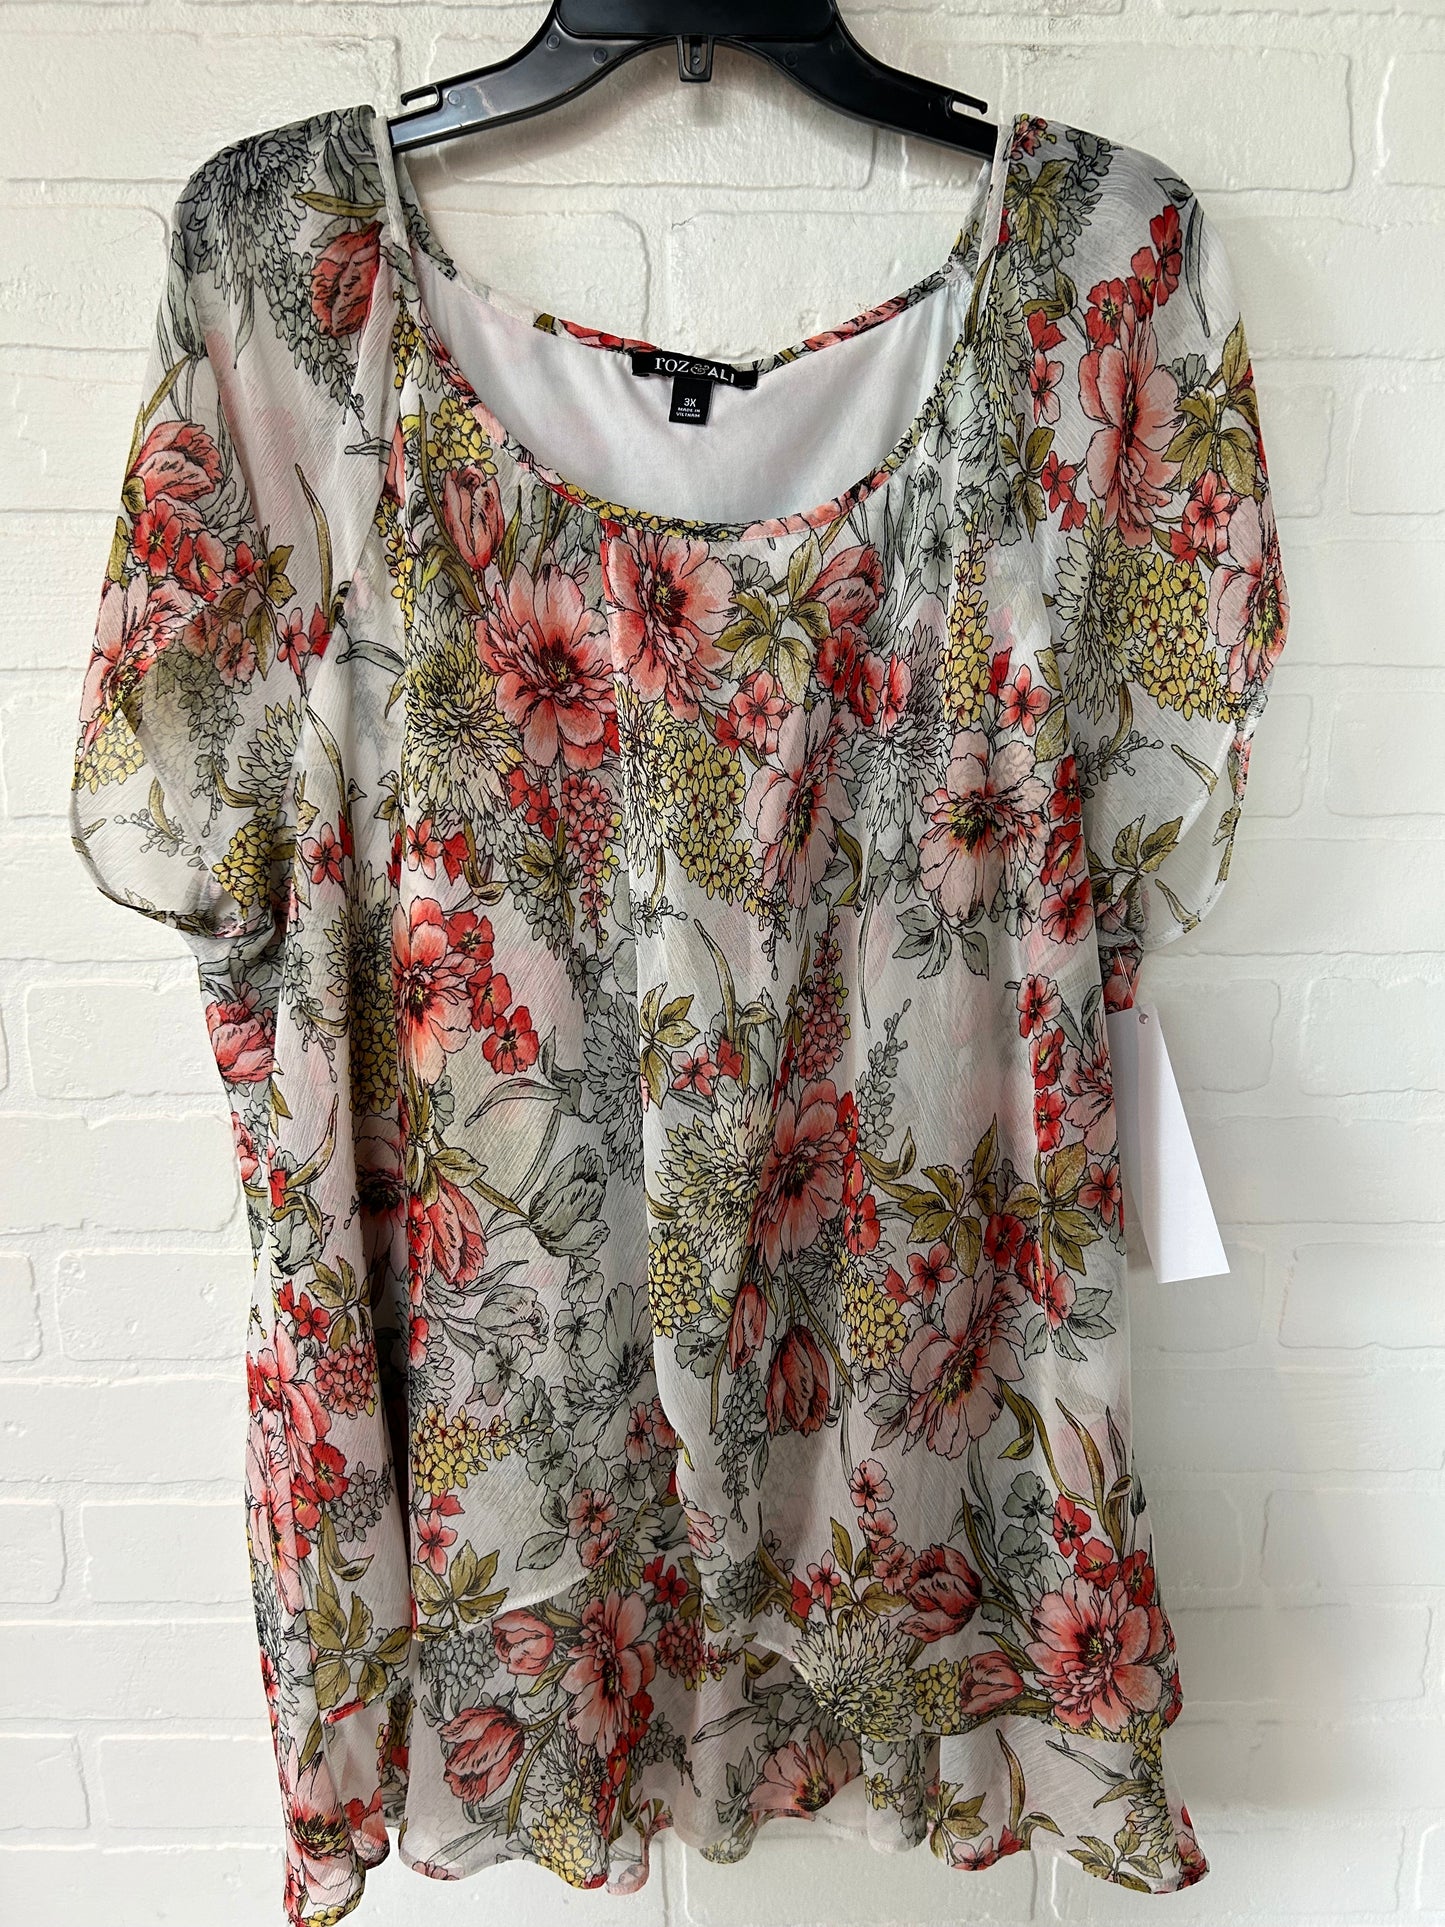 Floral Print Top Short Sleeve Roz And Ali, Size 3x